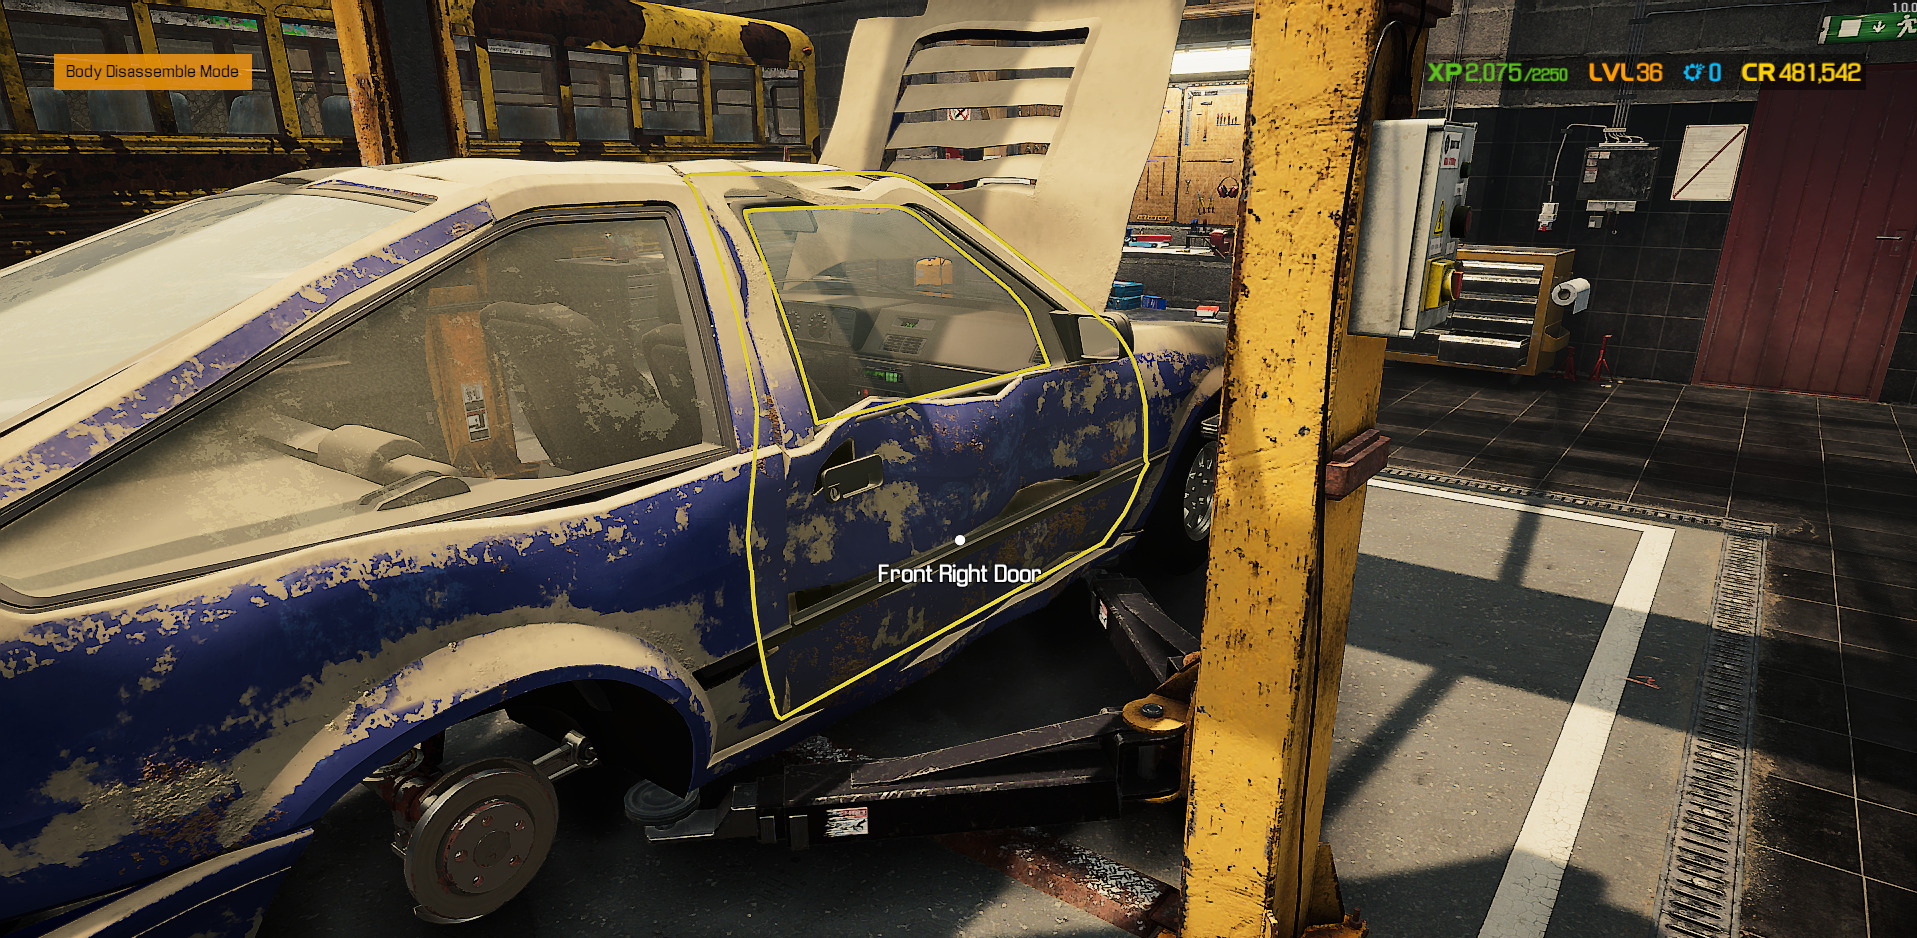 Remove the damaged body part from your car in Car Mechanic Simulator. 